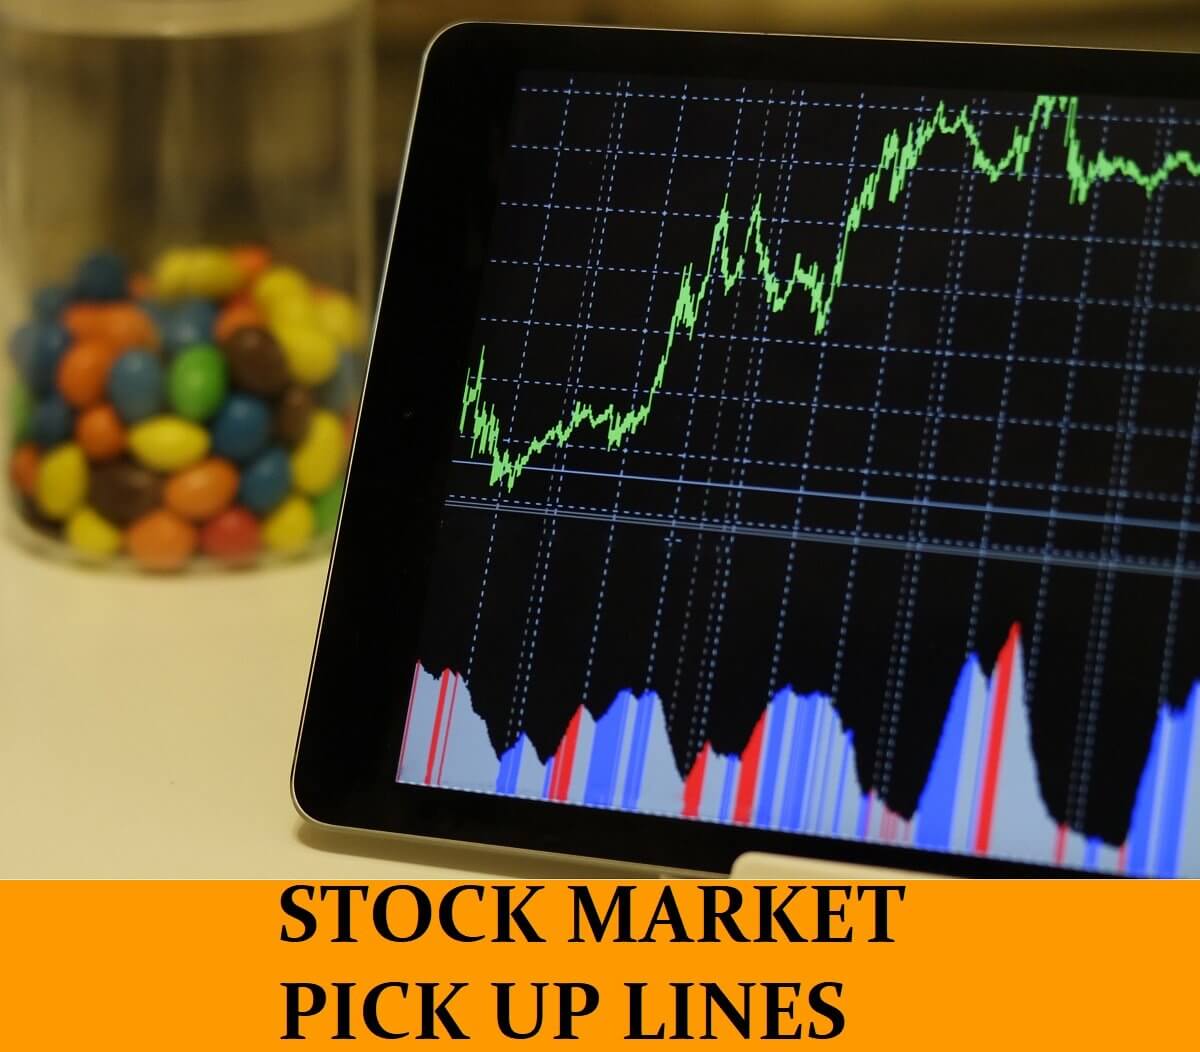 Pick Up Lines About Stock Trading, Options